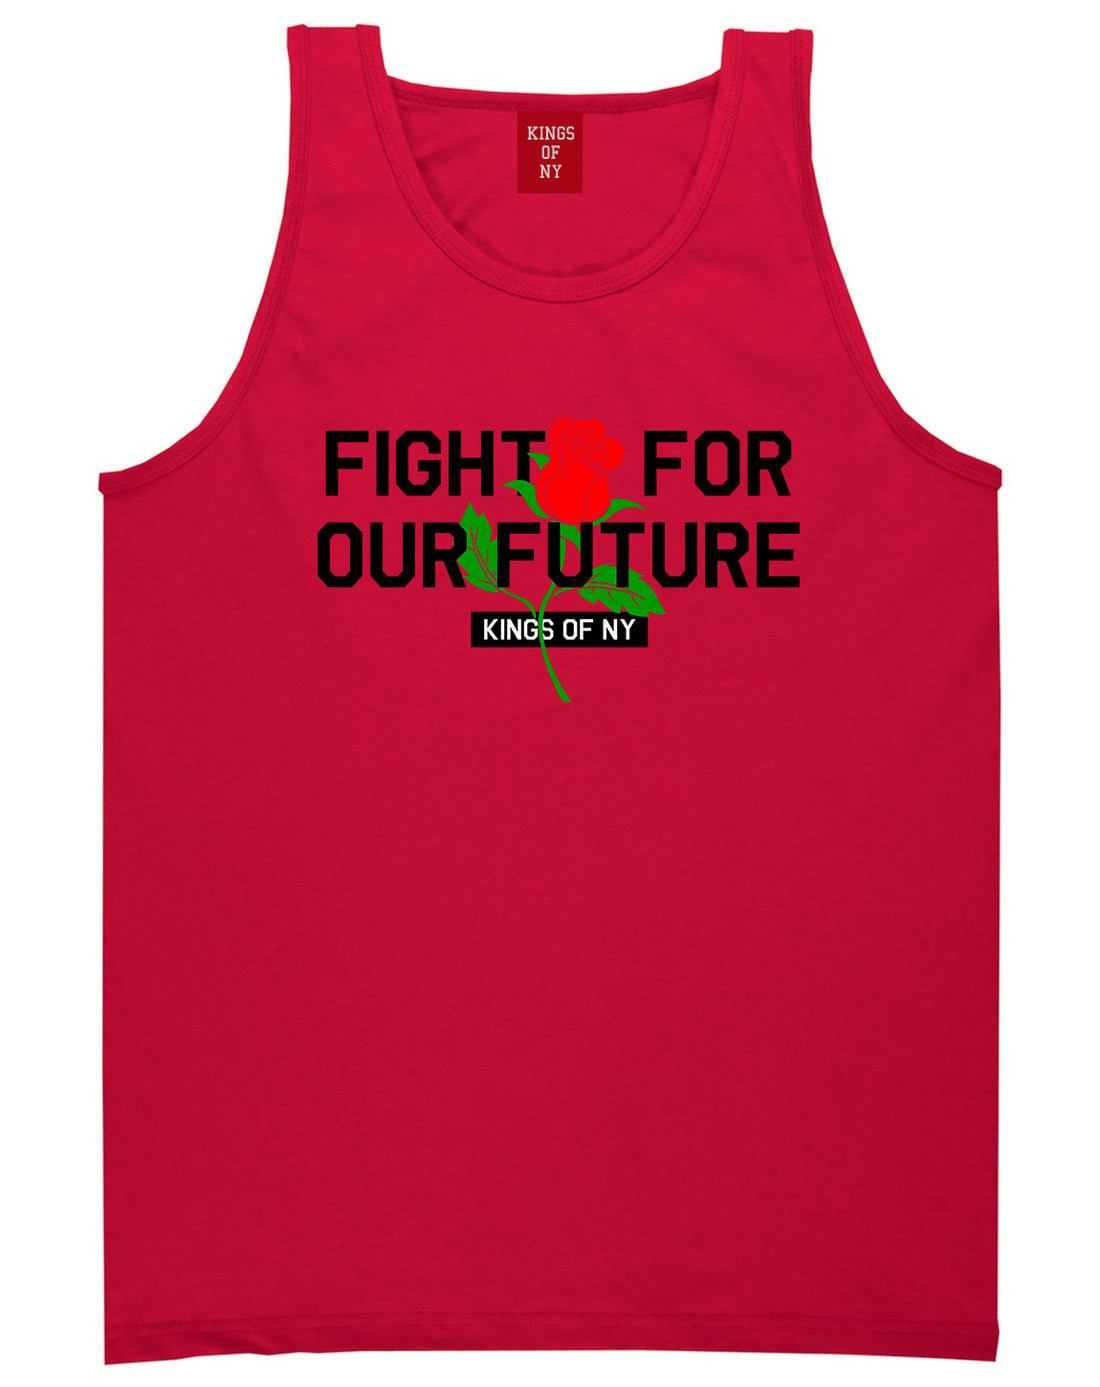 Fight For Our Future Rose Mens Tank Top Shirt Red